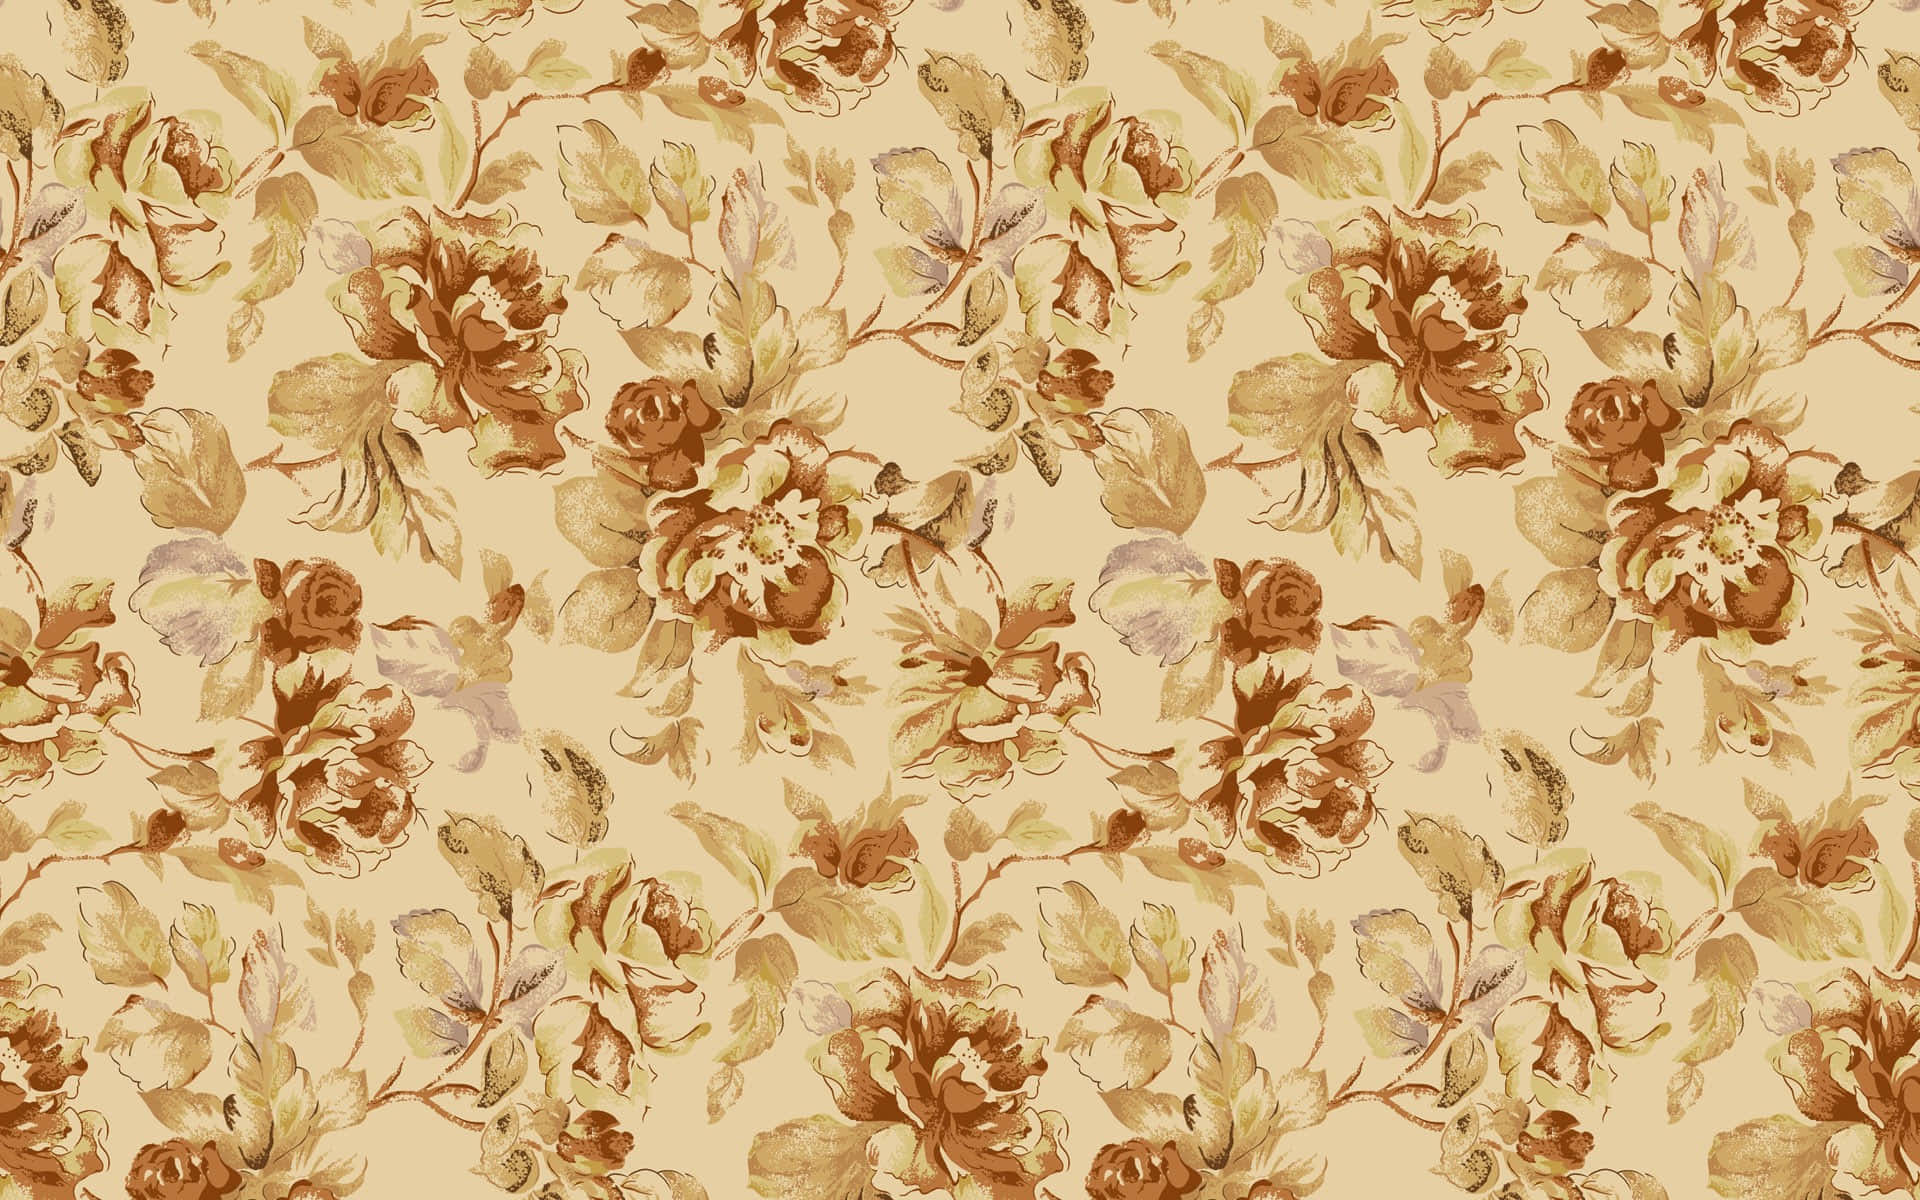 A Floral Pattern In Beige And Brown